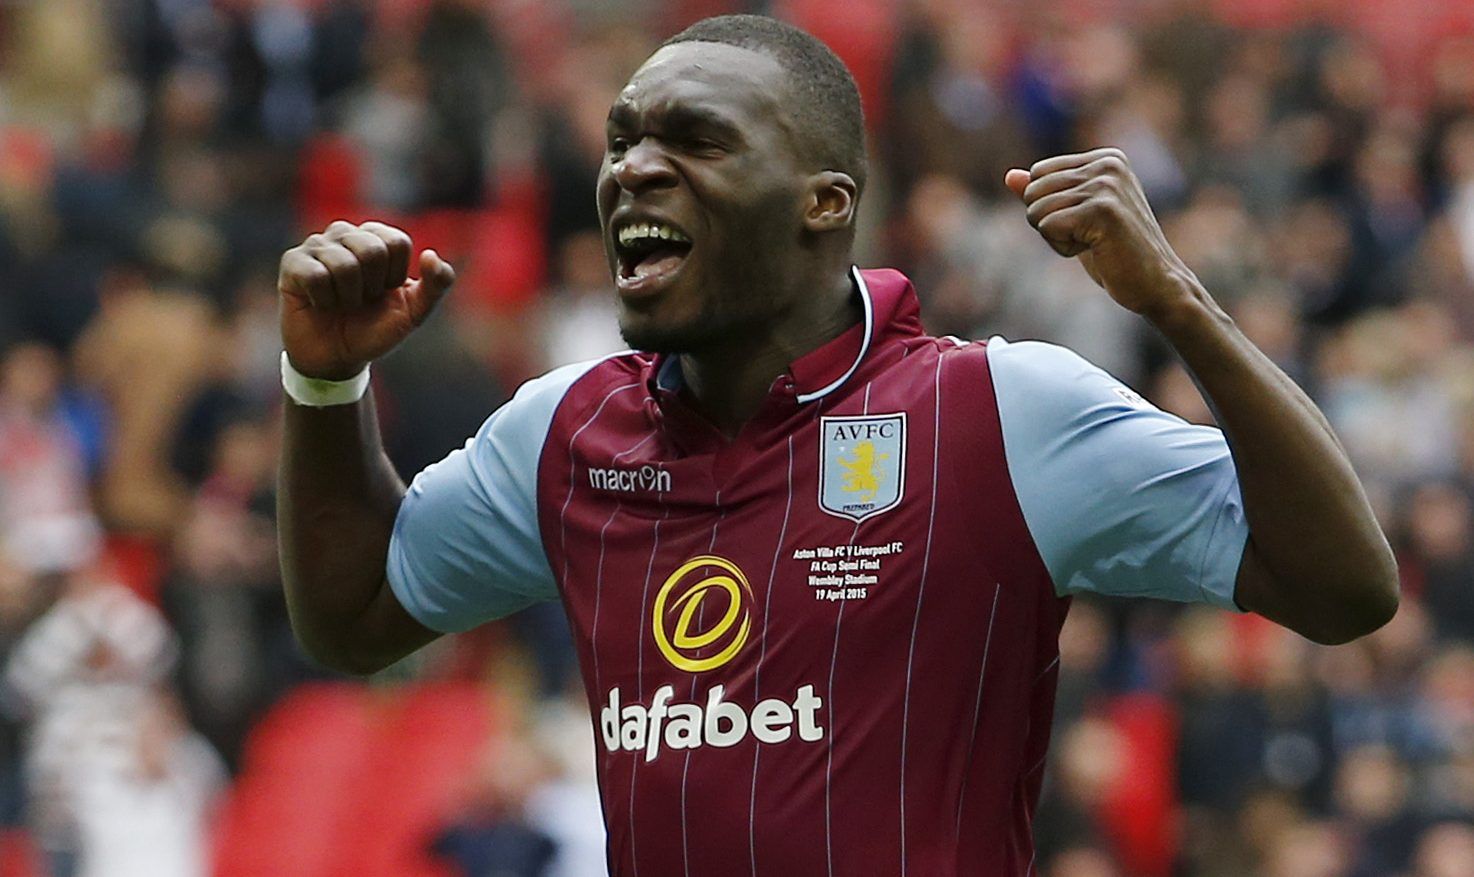 Football - Aston Villa v Liverpool - FA Cup Semi Final - Wembley Stadium - 19/4/15 
Aston Villa's Christian Benteke celebrates at the end of the match 
Action Images via Reuters / John Sibley 
Livepic 
EDITORIAL USE ONLY. No use with unauthorized audio, video, data, fixture lists, club/league logos or 